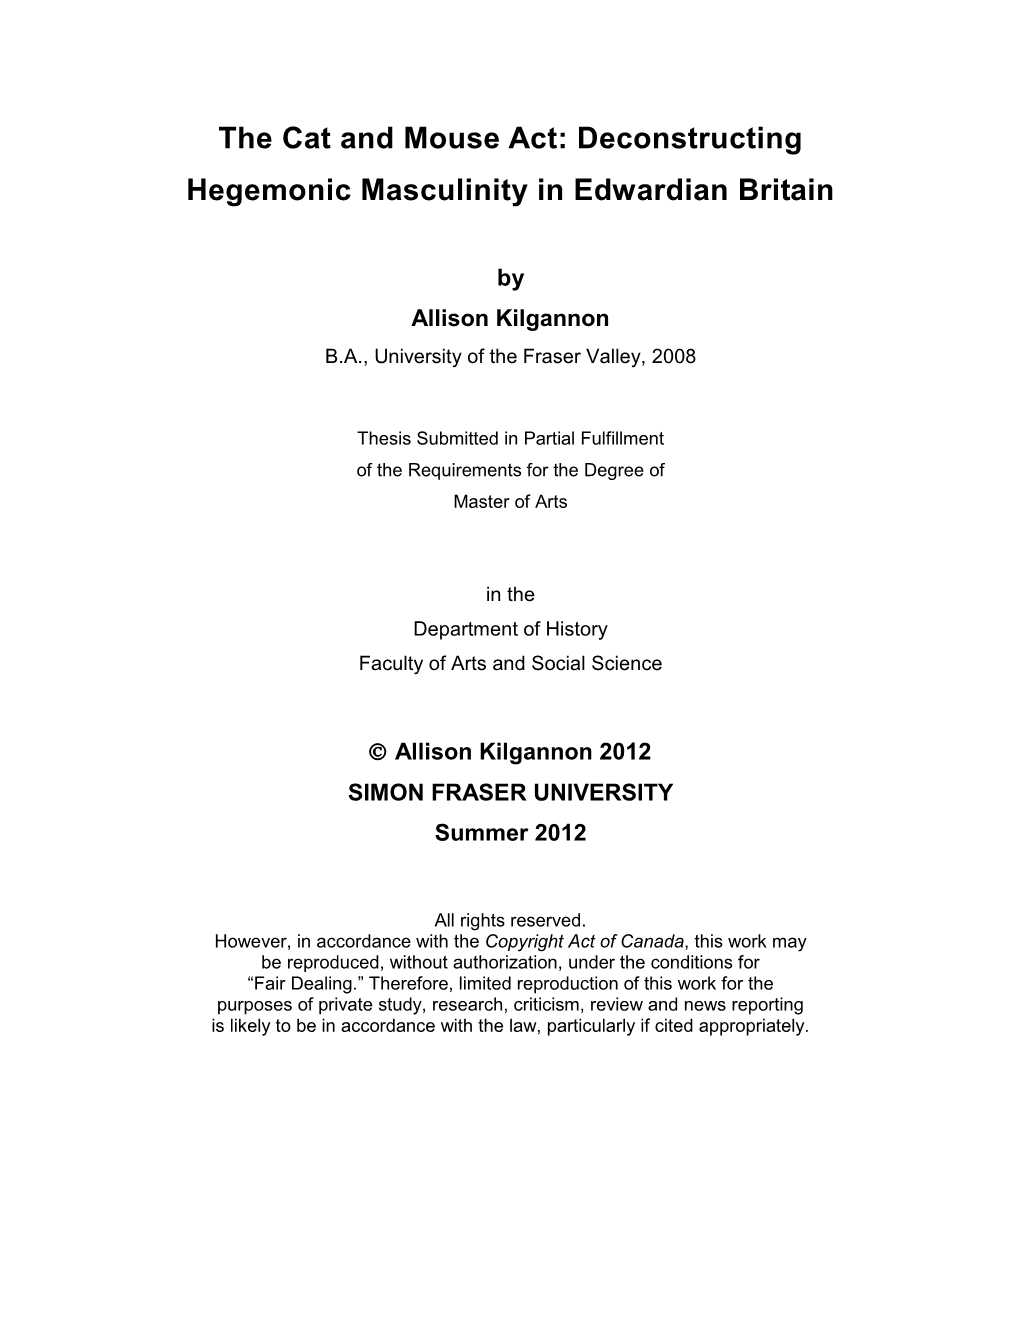 The Cat and Mouse Act: Deconstructing Hegemonic Masculinity in Edwardian Britain